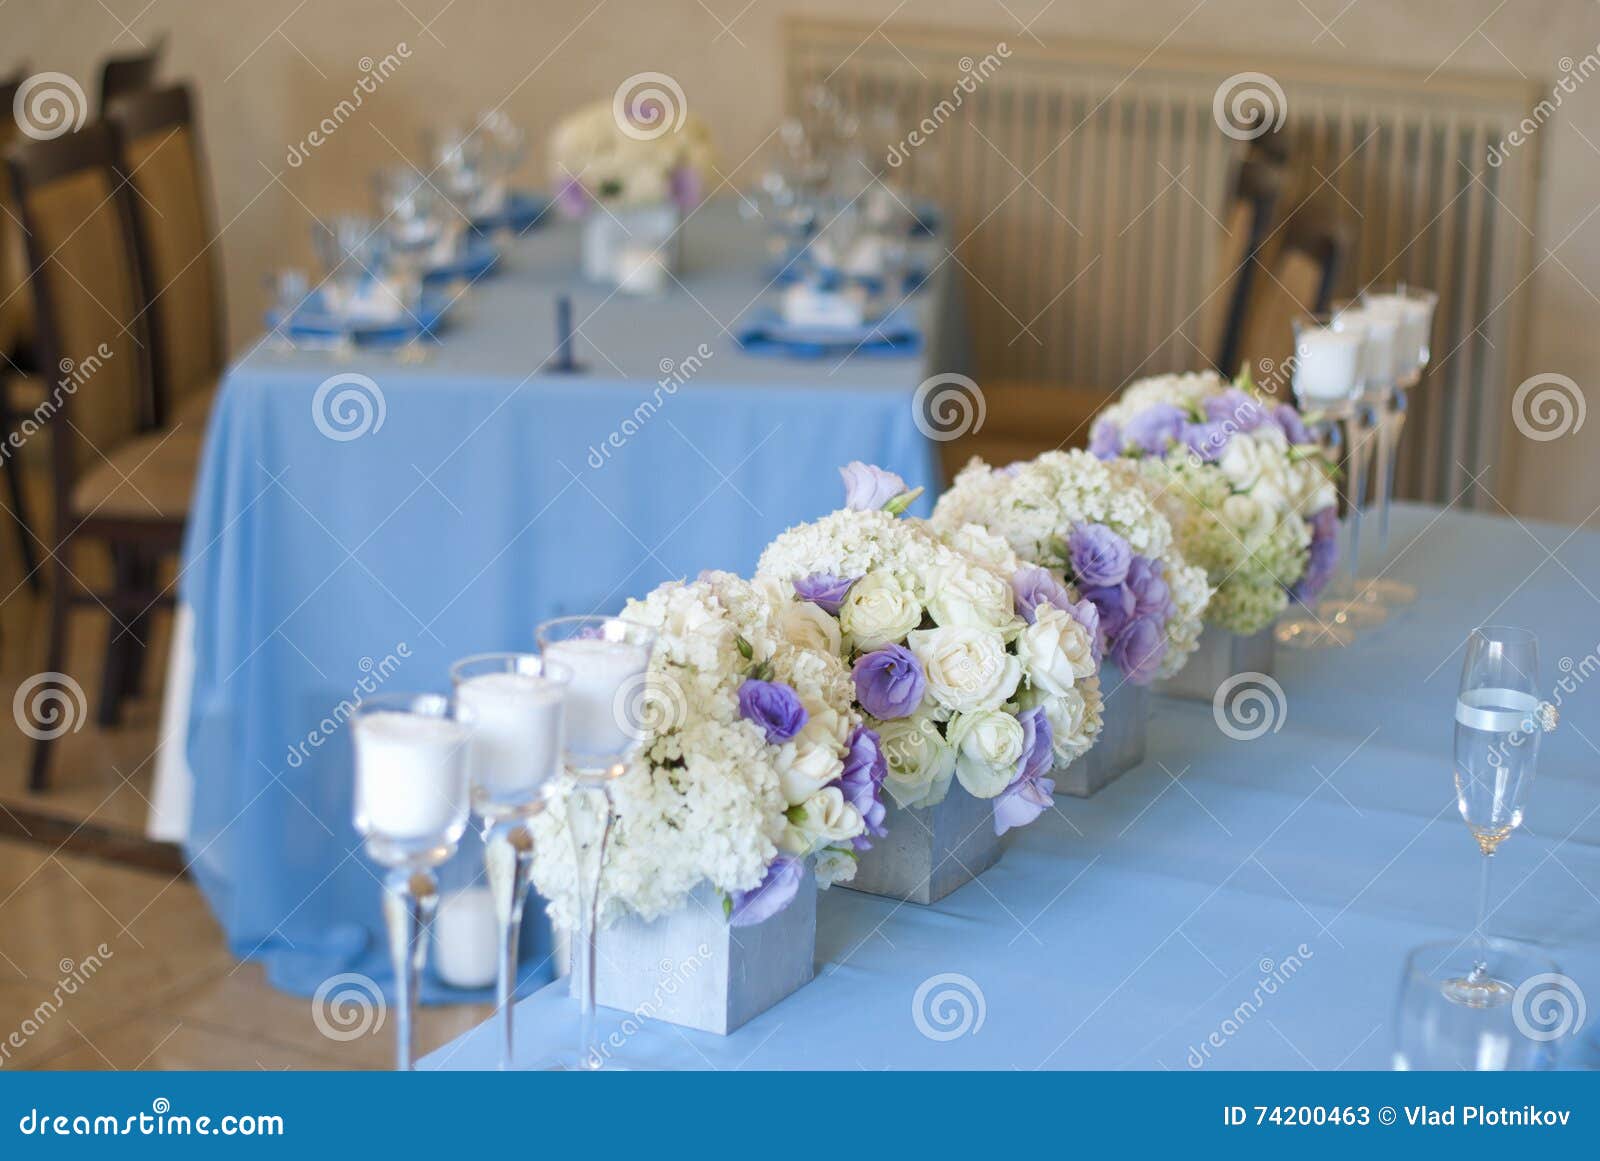 Nicely Decorated Wedding Table With Flowers Stock Image Image Of